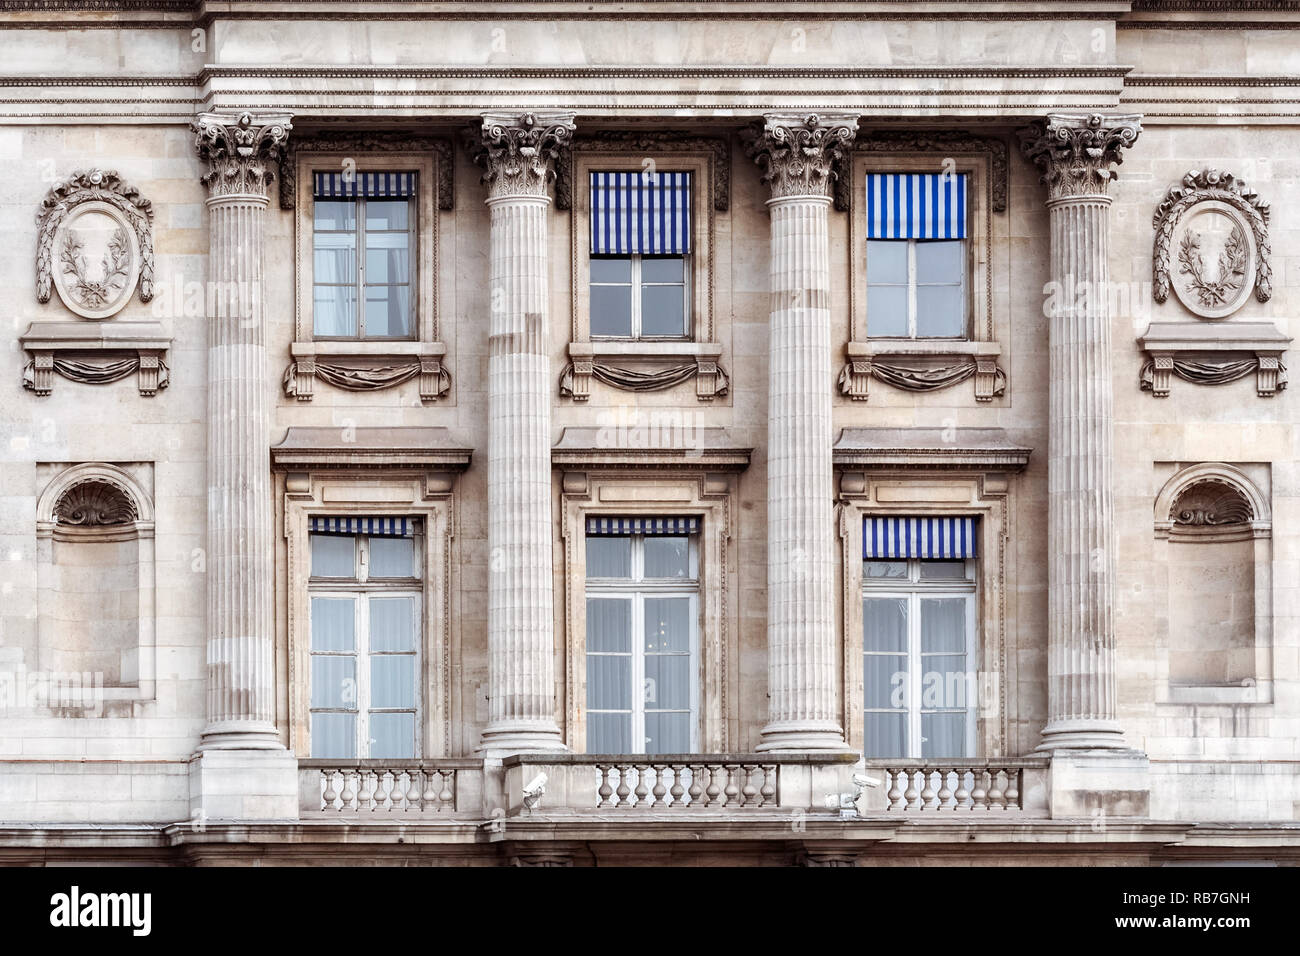 Rectangular windows with columns, a balcony and niches against a marble ...